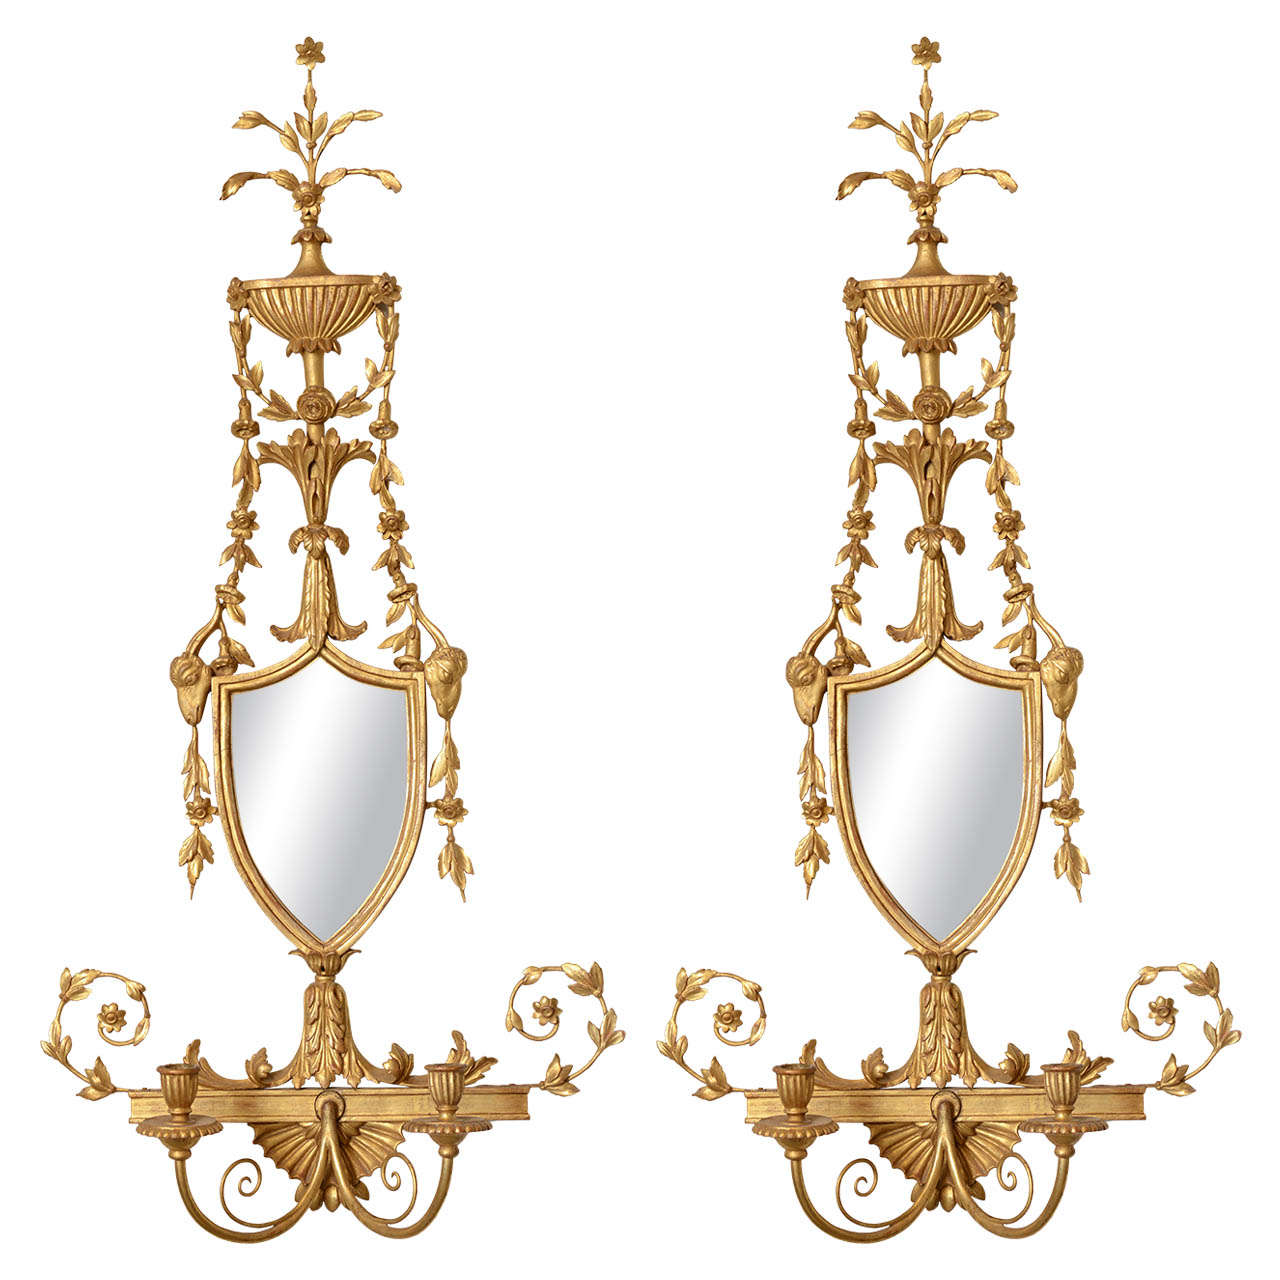 Pair Of 19th C. Giltwood Mirrored Sconces